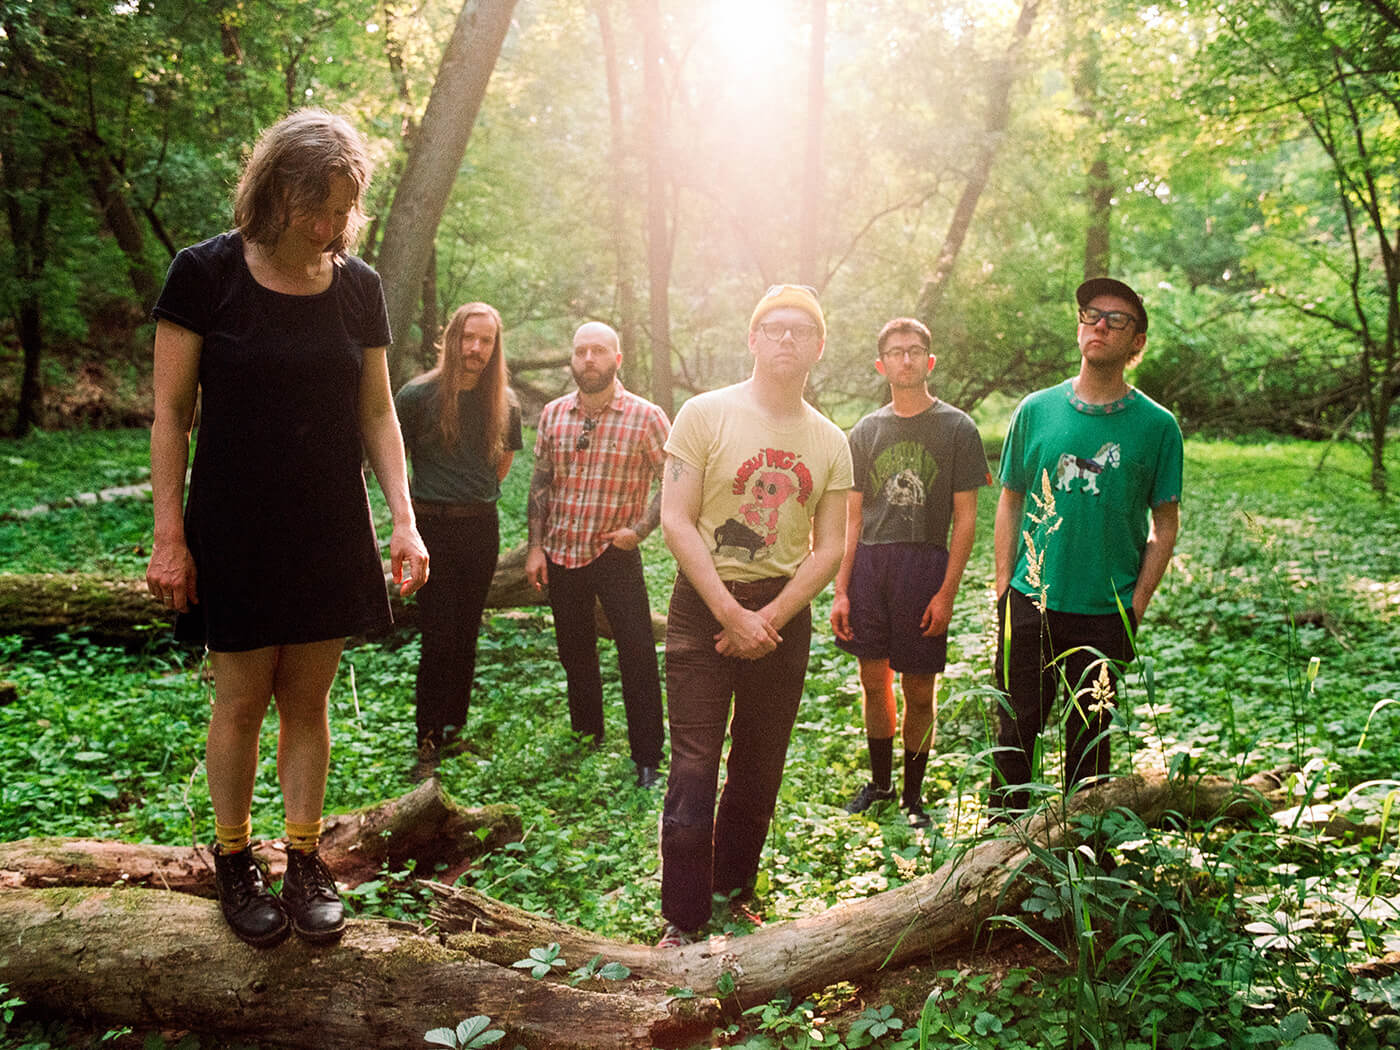 The band Dusk photographed against nature, photo by Billy Hintz